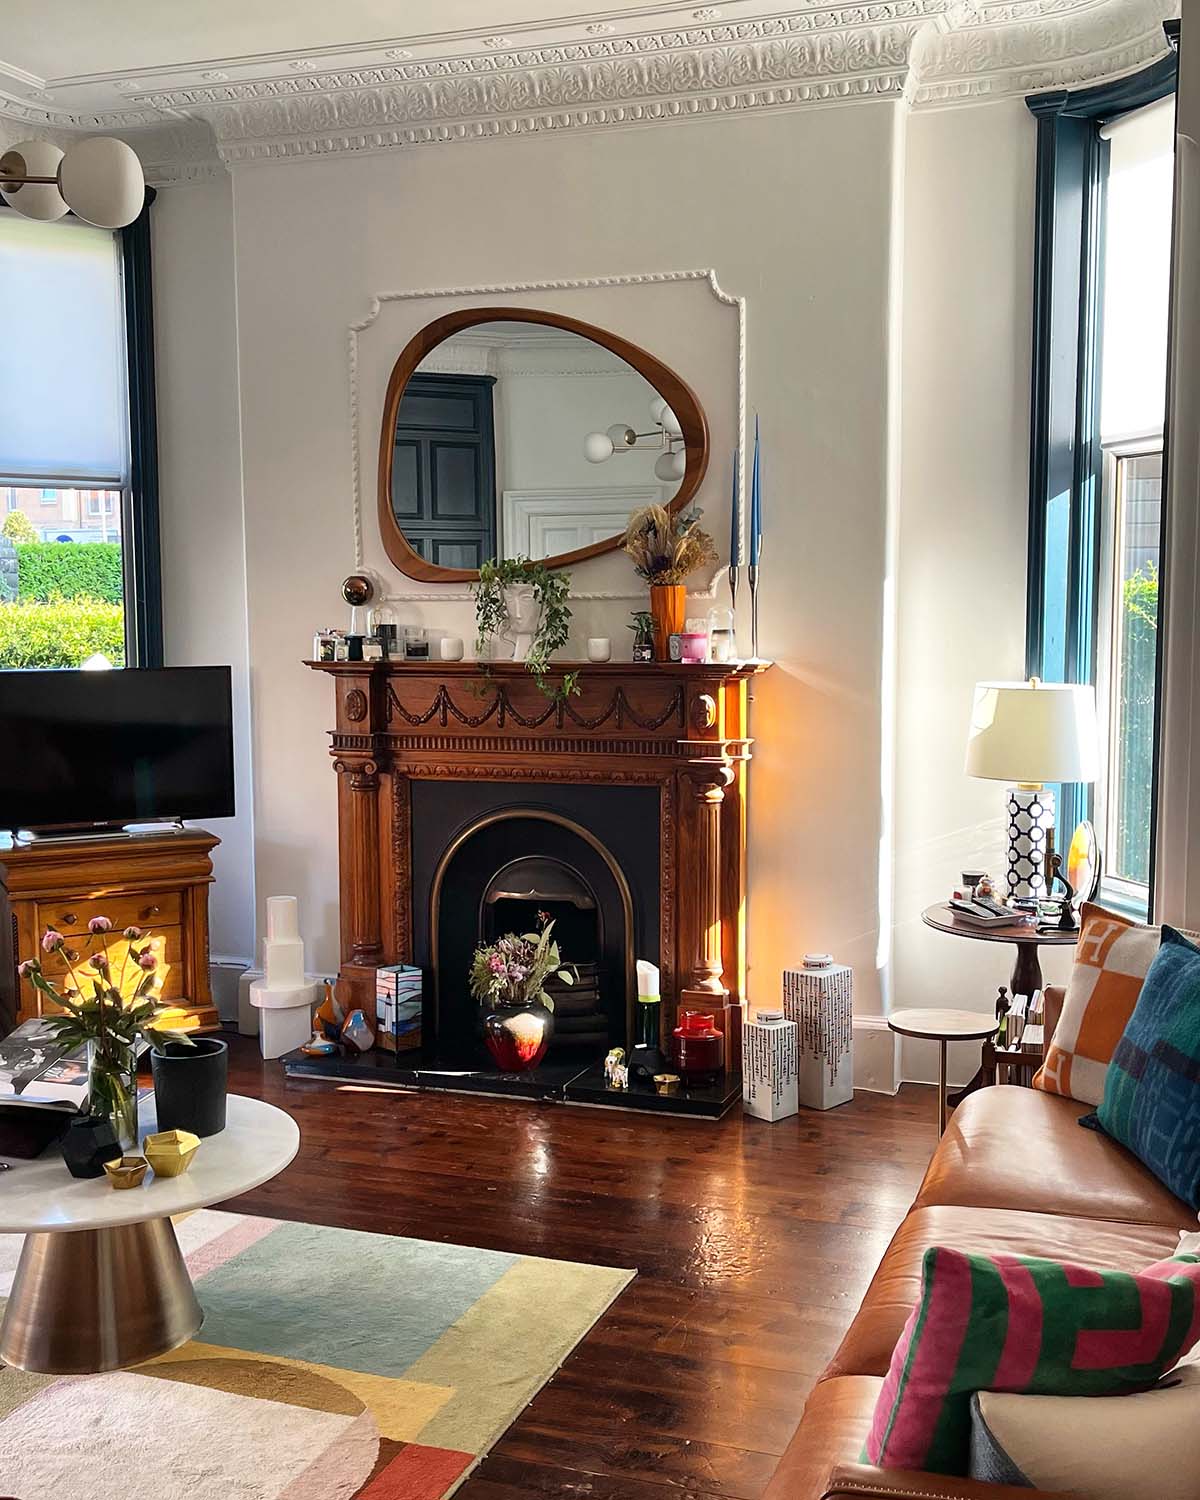 a living room in a tenement flat with a wooden panelled fireplace and statement mirror above the mantelpiece